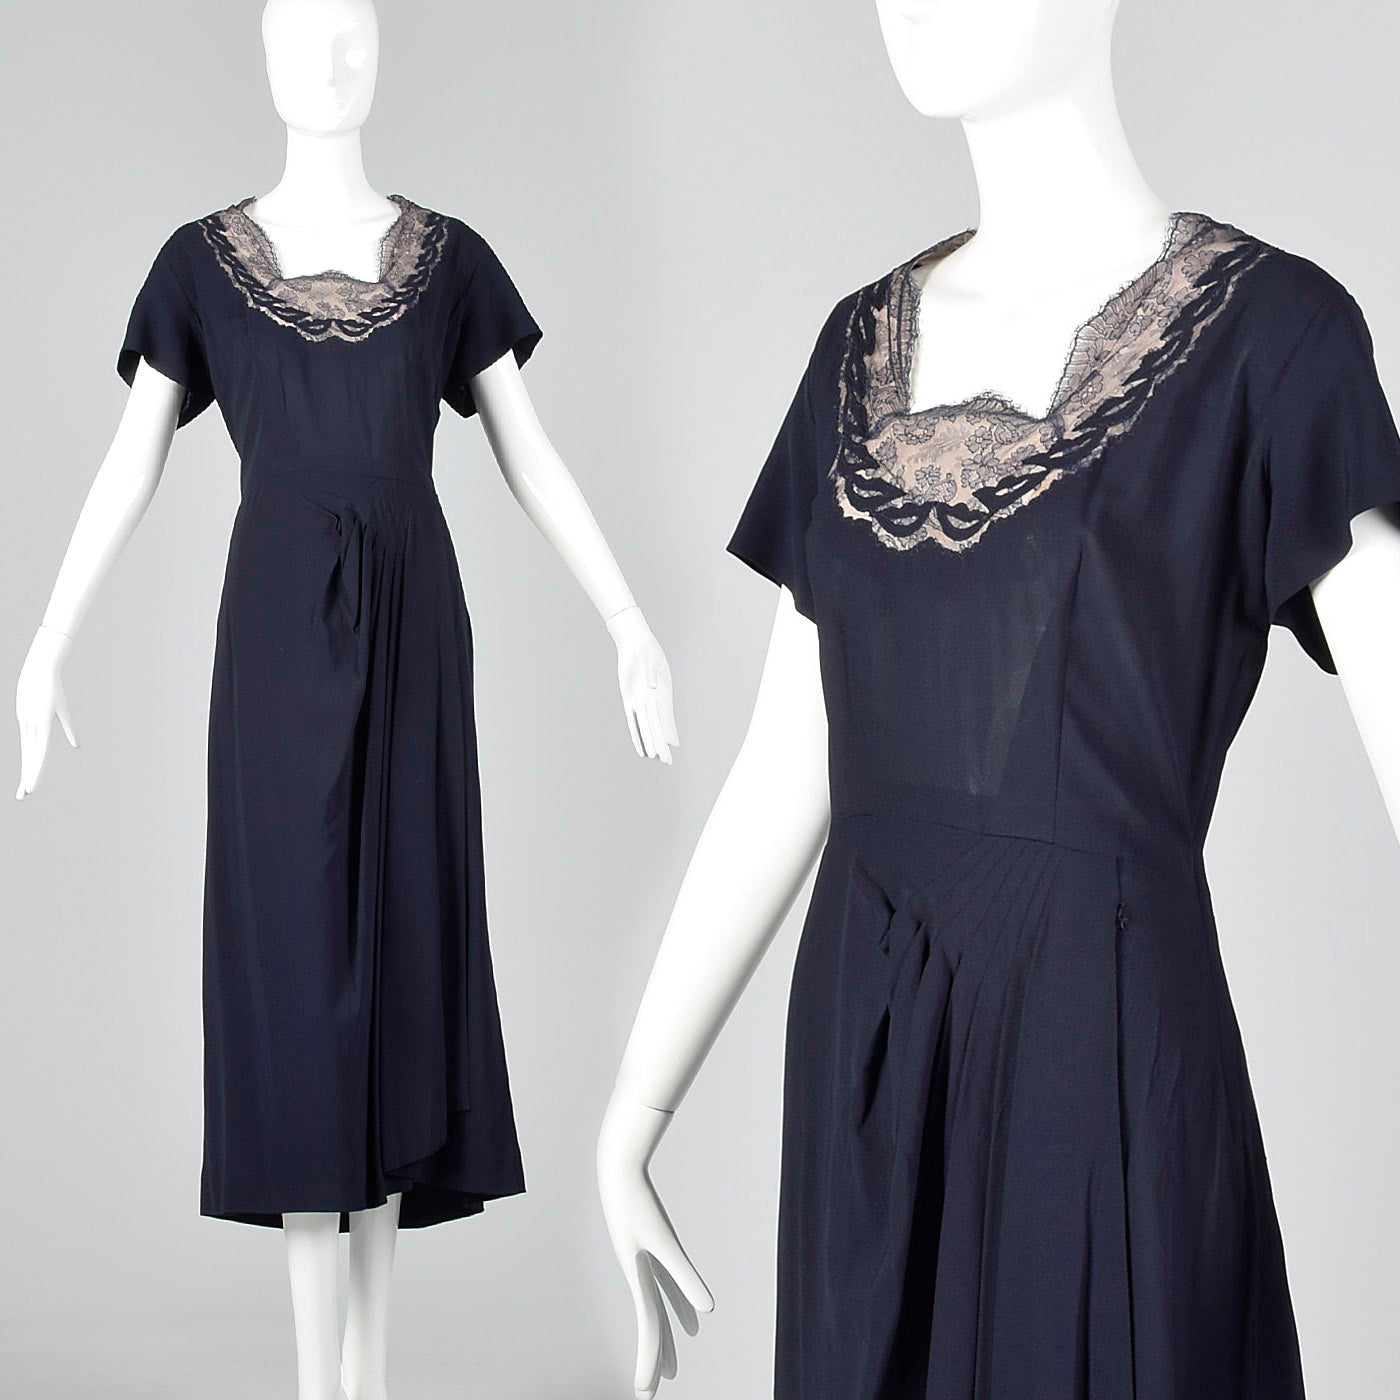 1950s Blue Rayon Dress with Lace Illusion Neckline